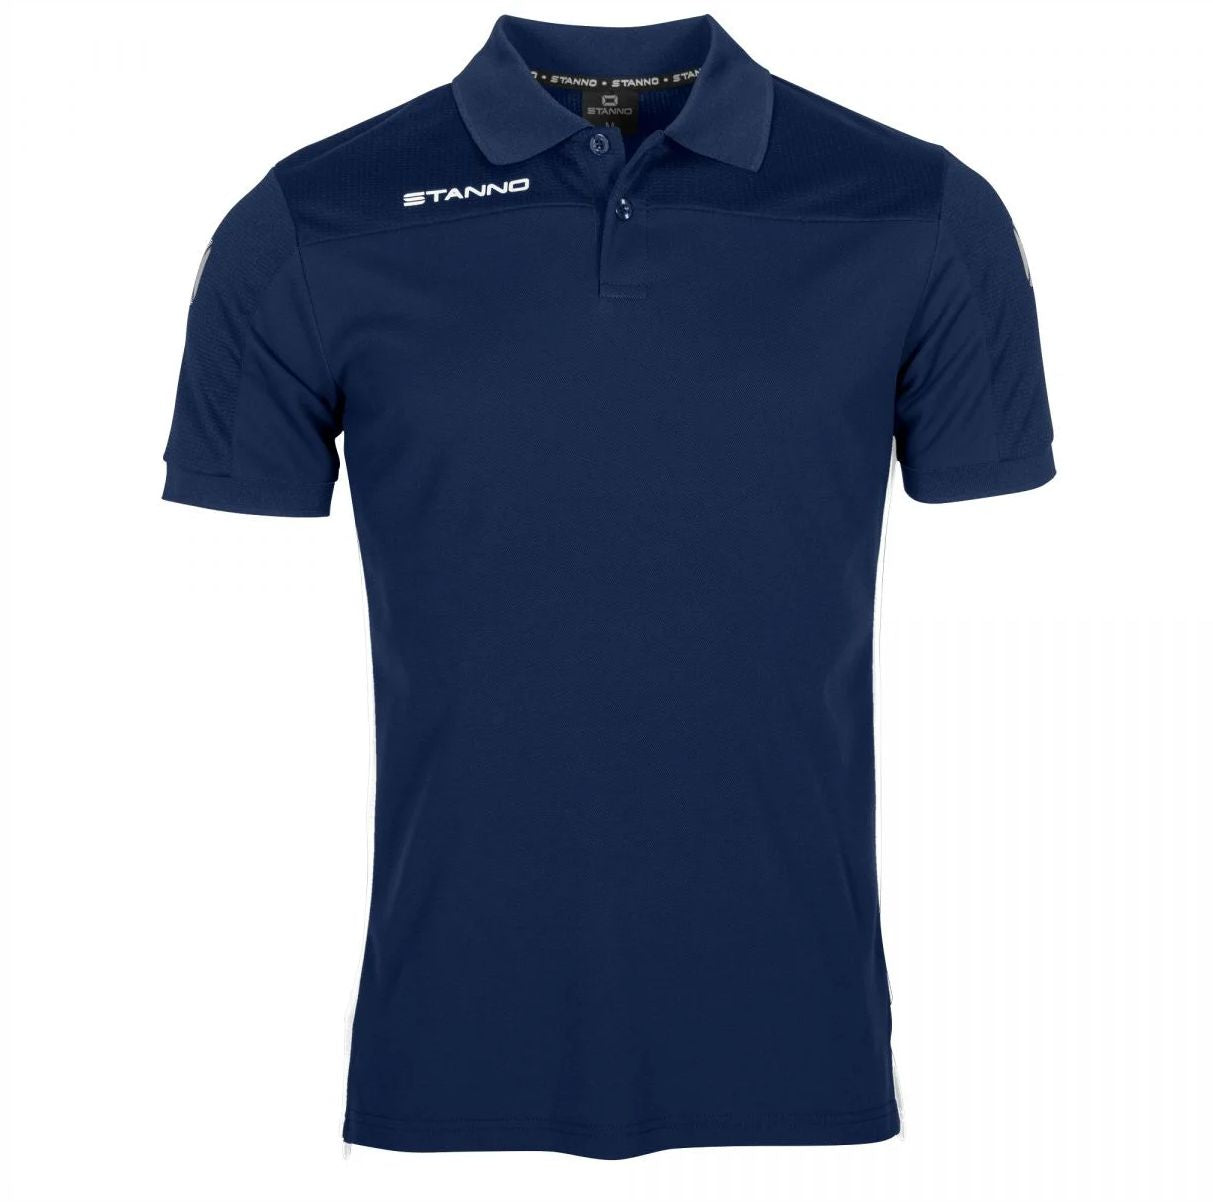 Stanno - Pride Polo - Navy - Adult